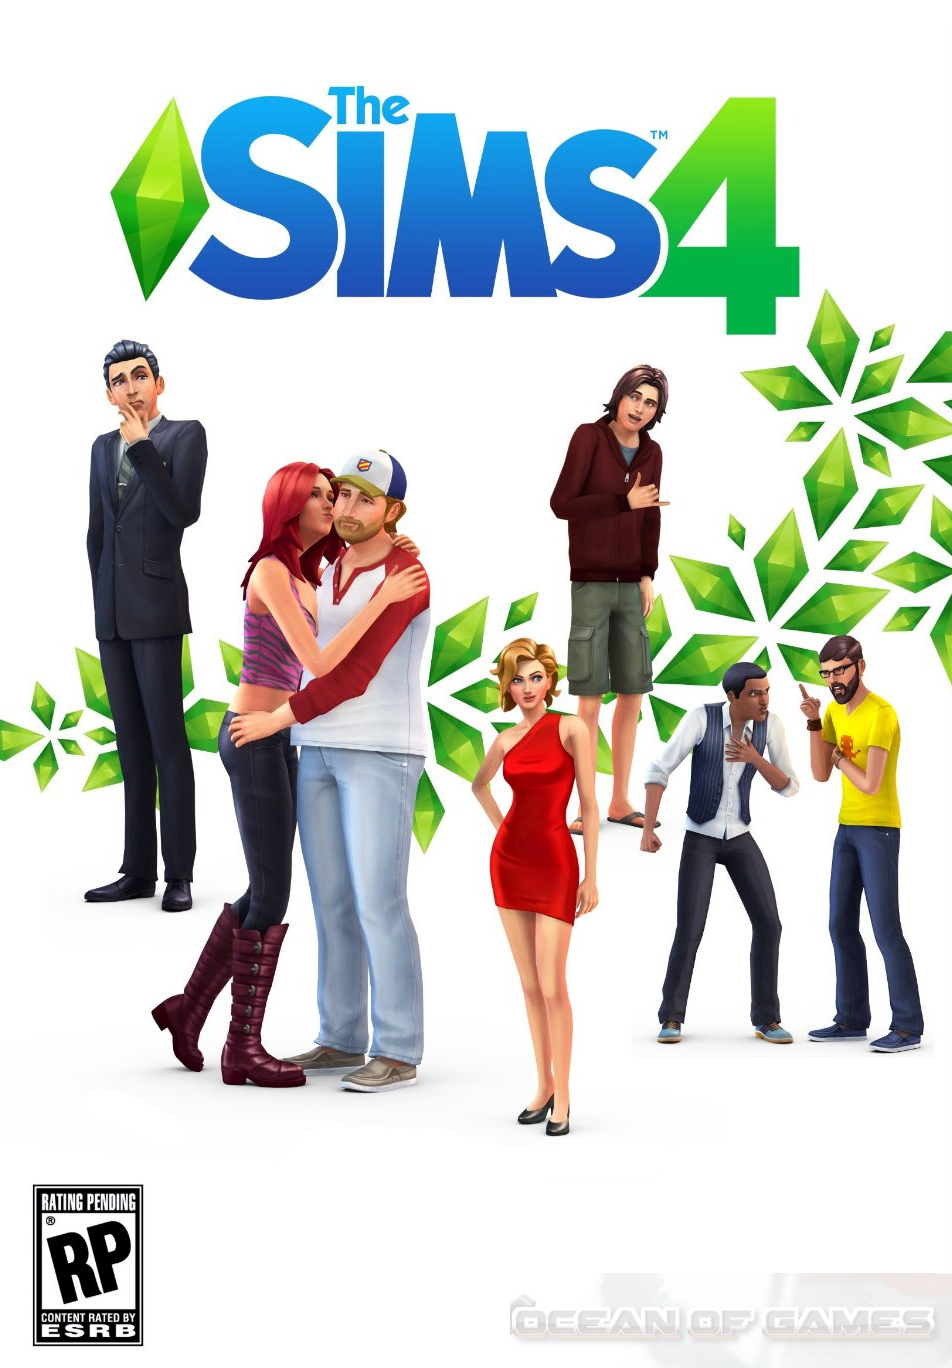 The Sims 4 Deluxe Edition Free Download